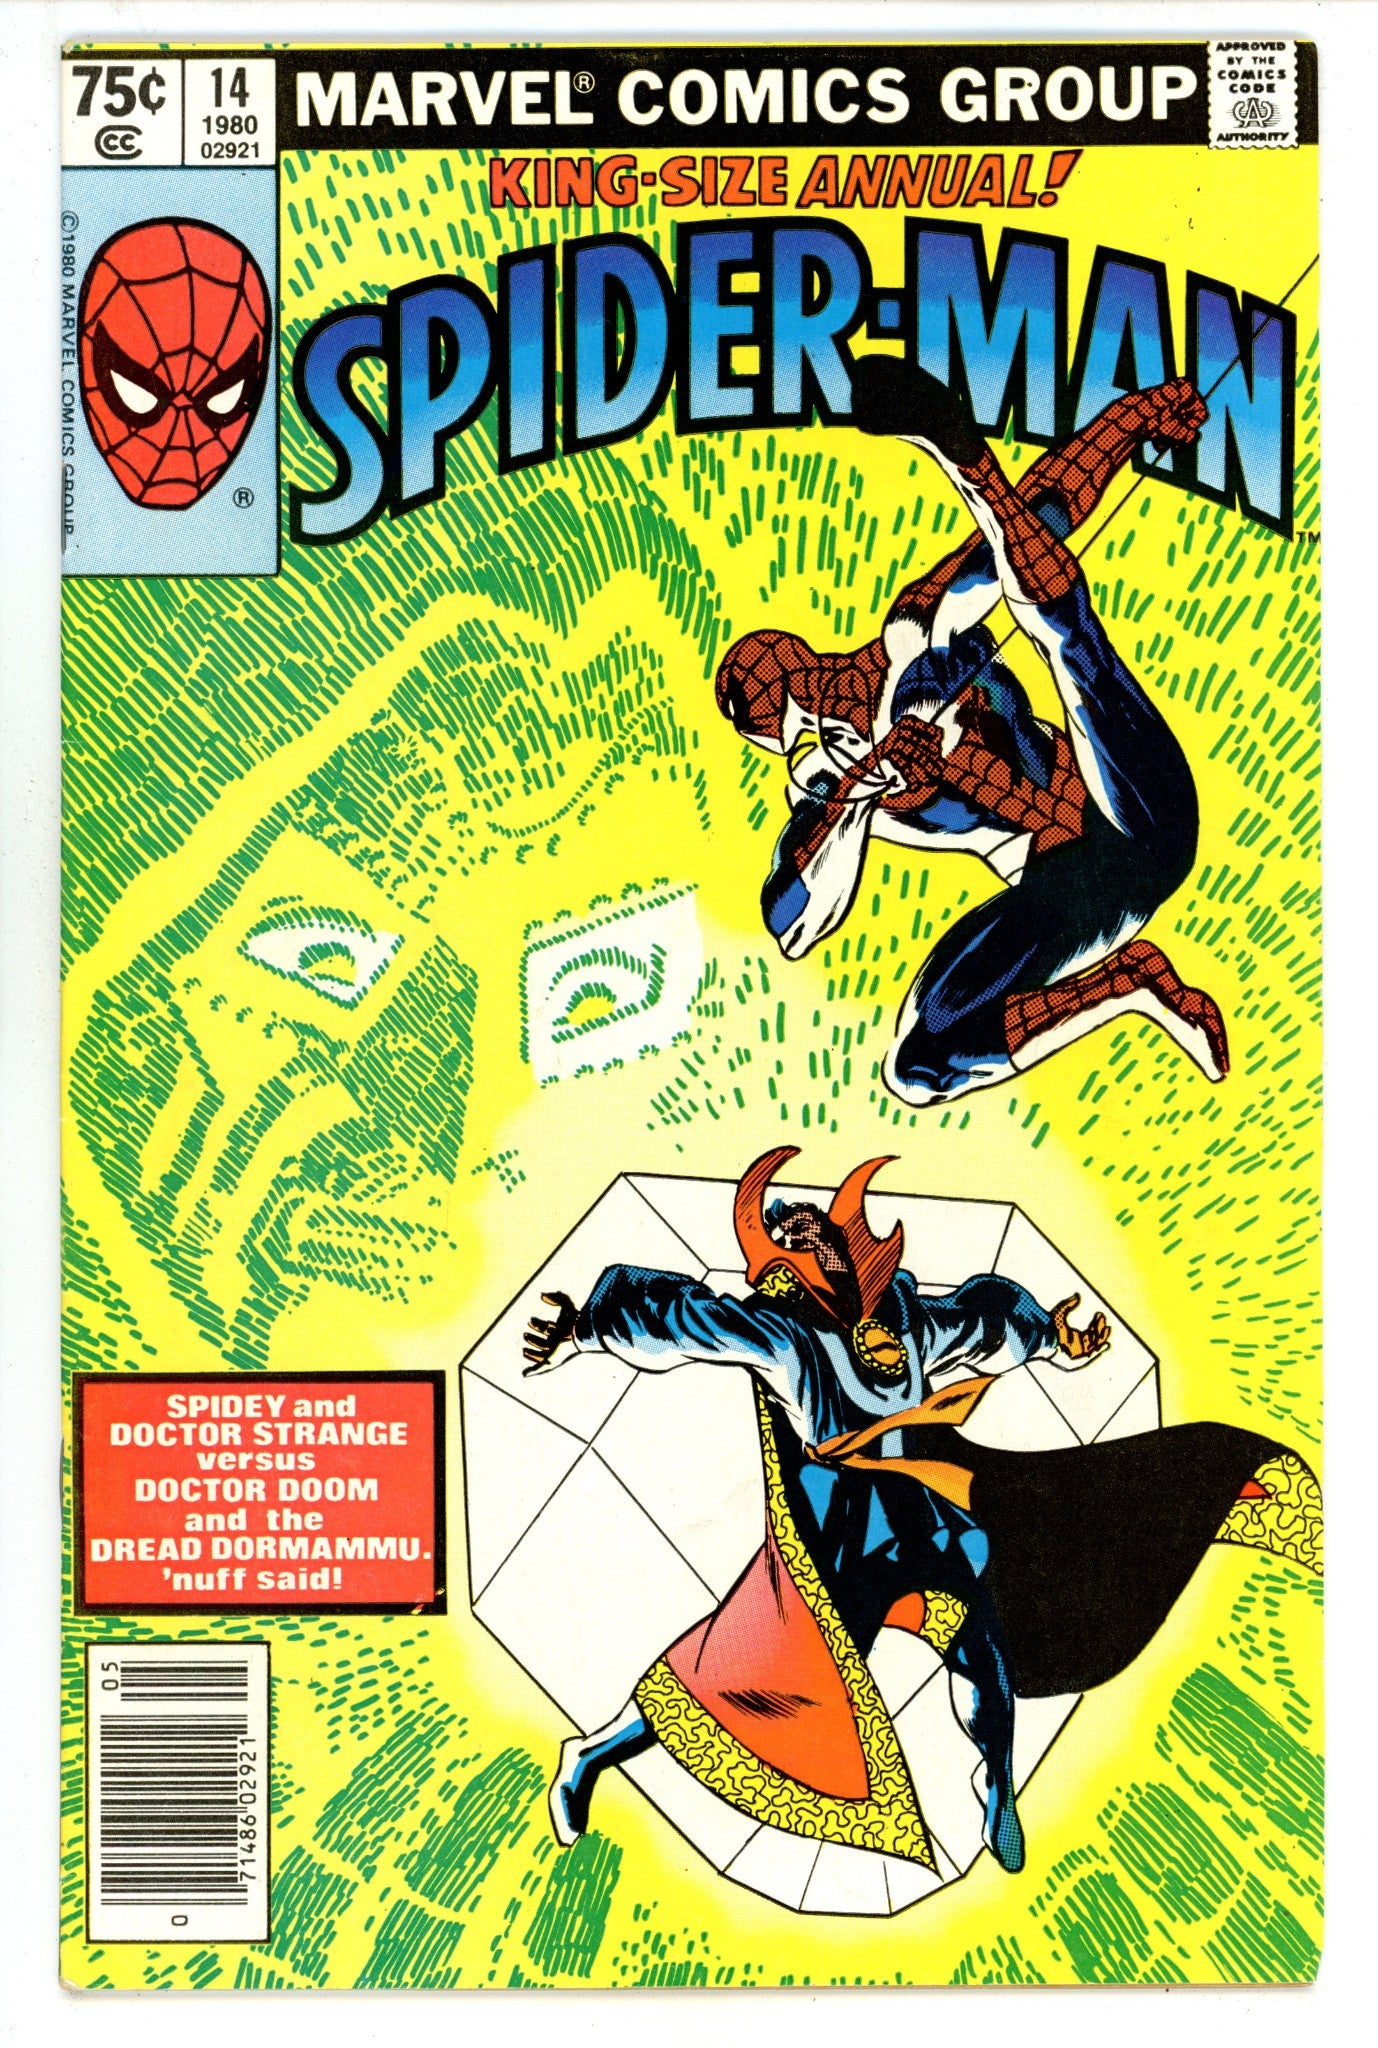 The Amazing Spider-Man Annual Vol 1 14 FN (6.0) (1980) Newsstand 